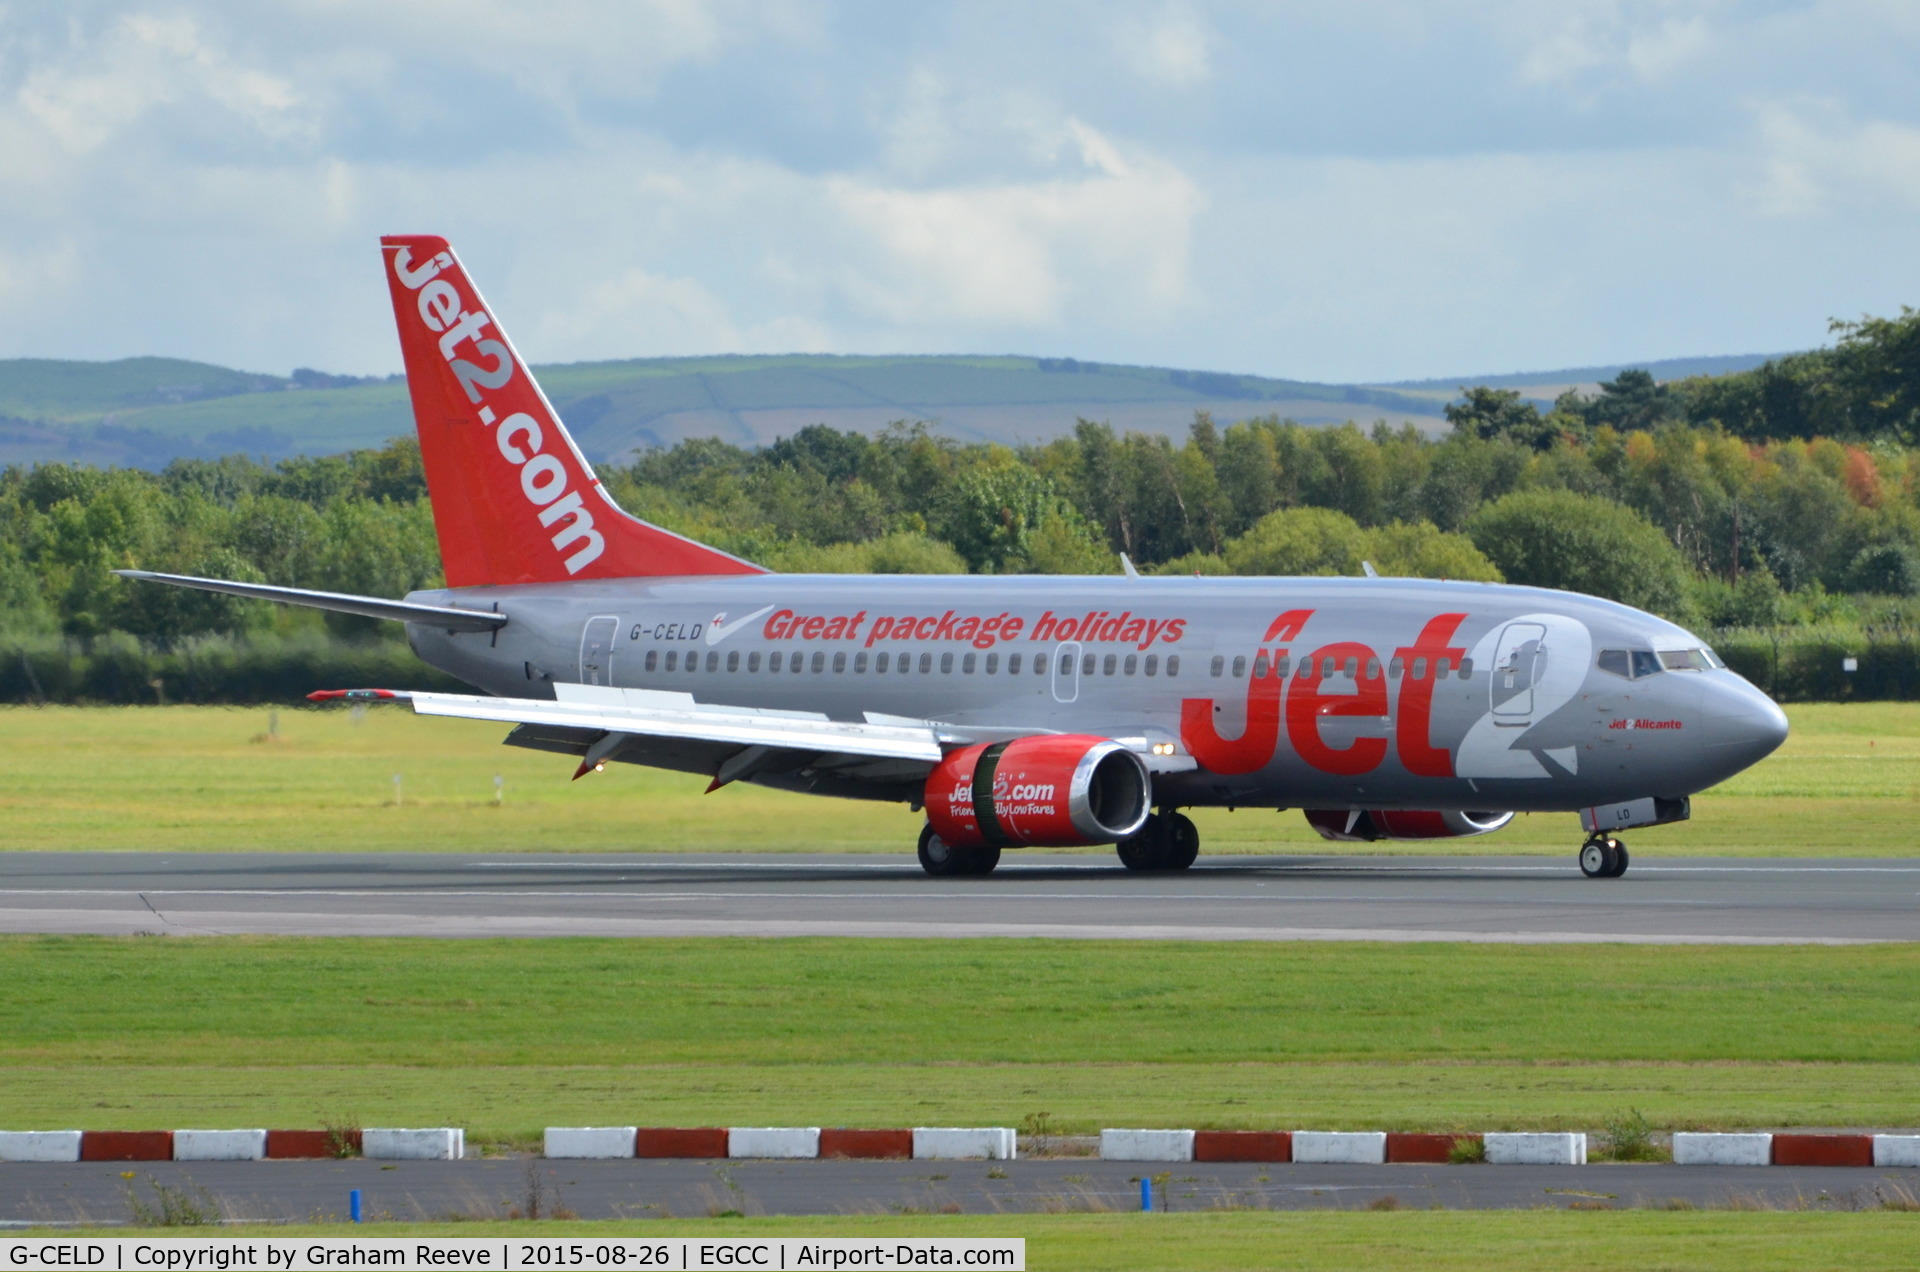 G-CELD, 1987 Boeing 737-33A C/N 23832, Just landed at Manchester.